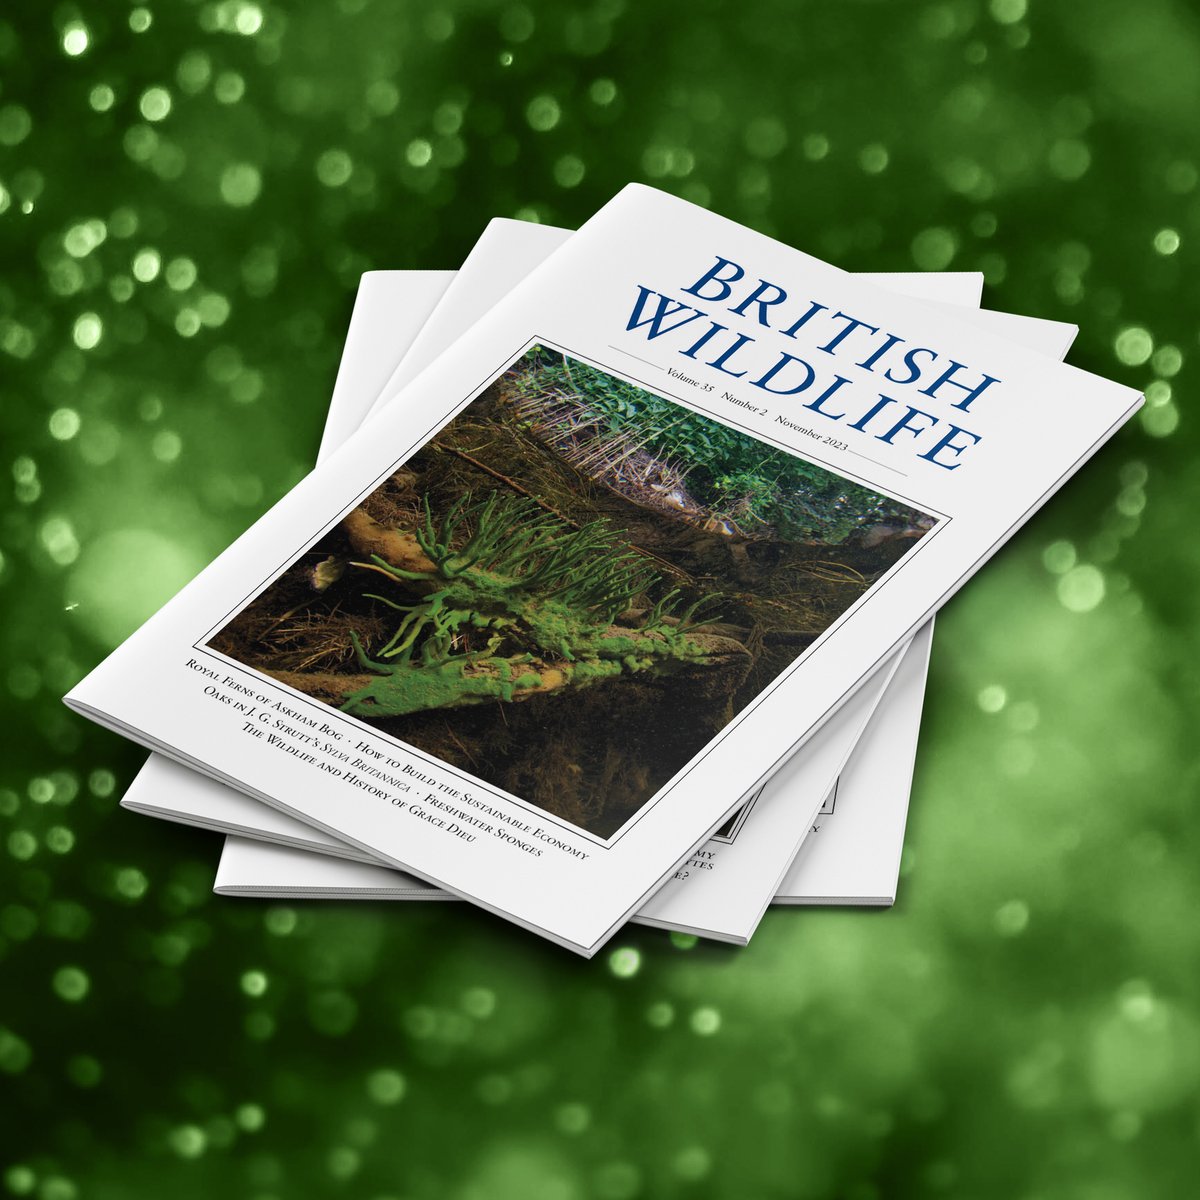 The November issue is now out! Featuring the Royal Fern at Askham Bog, freshwater sponges, the wildlife and history of Grace Dieu, how to build a sustainable economy, and much more... Visit britishwildlife.com to find out more